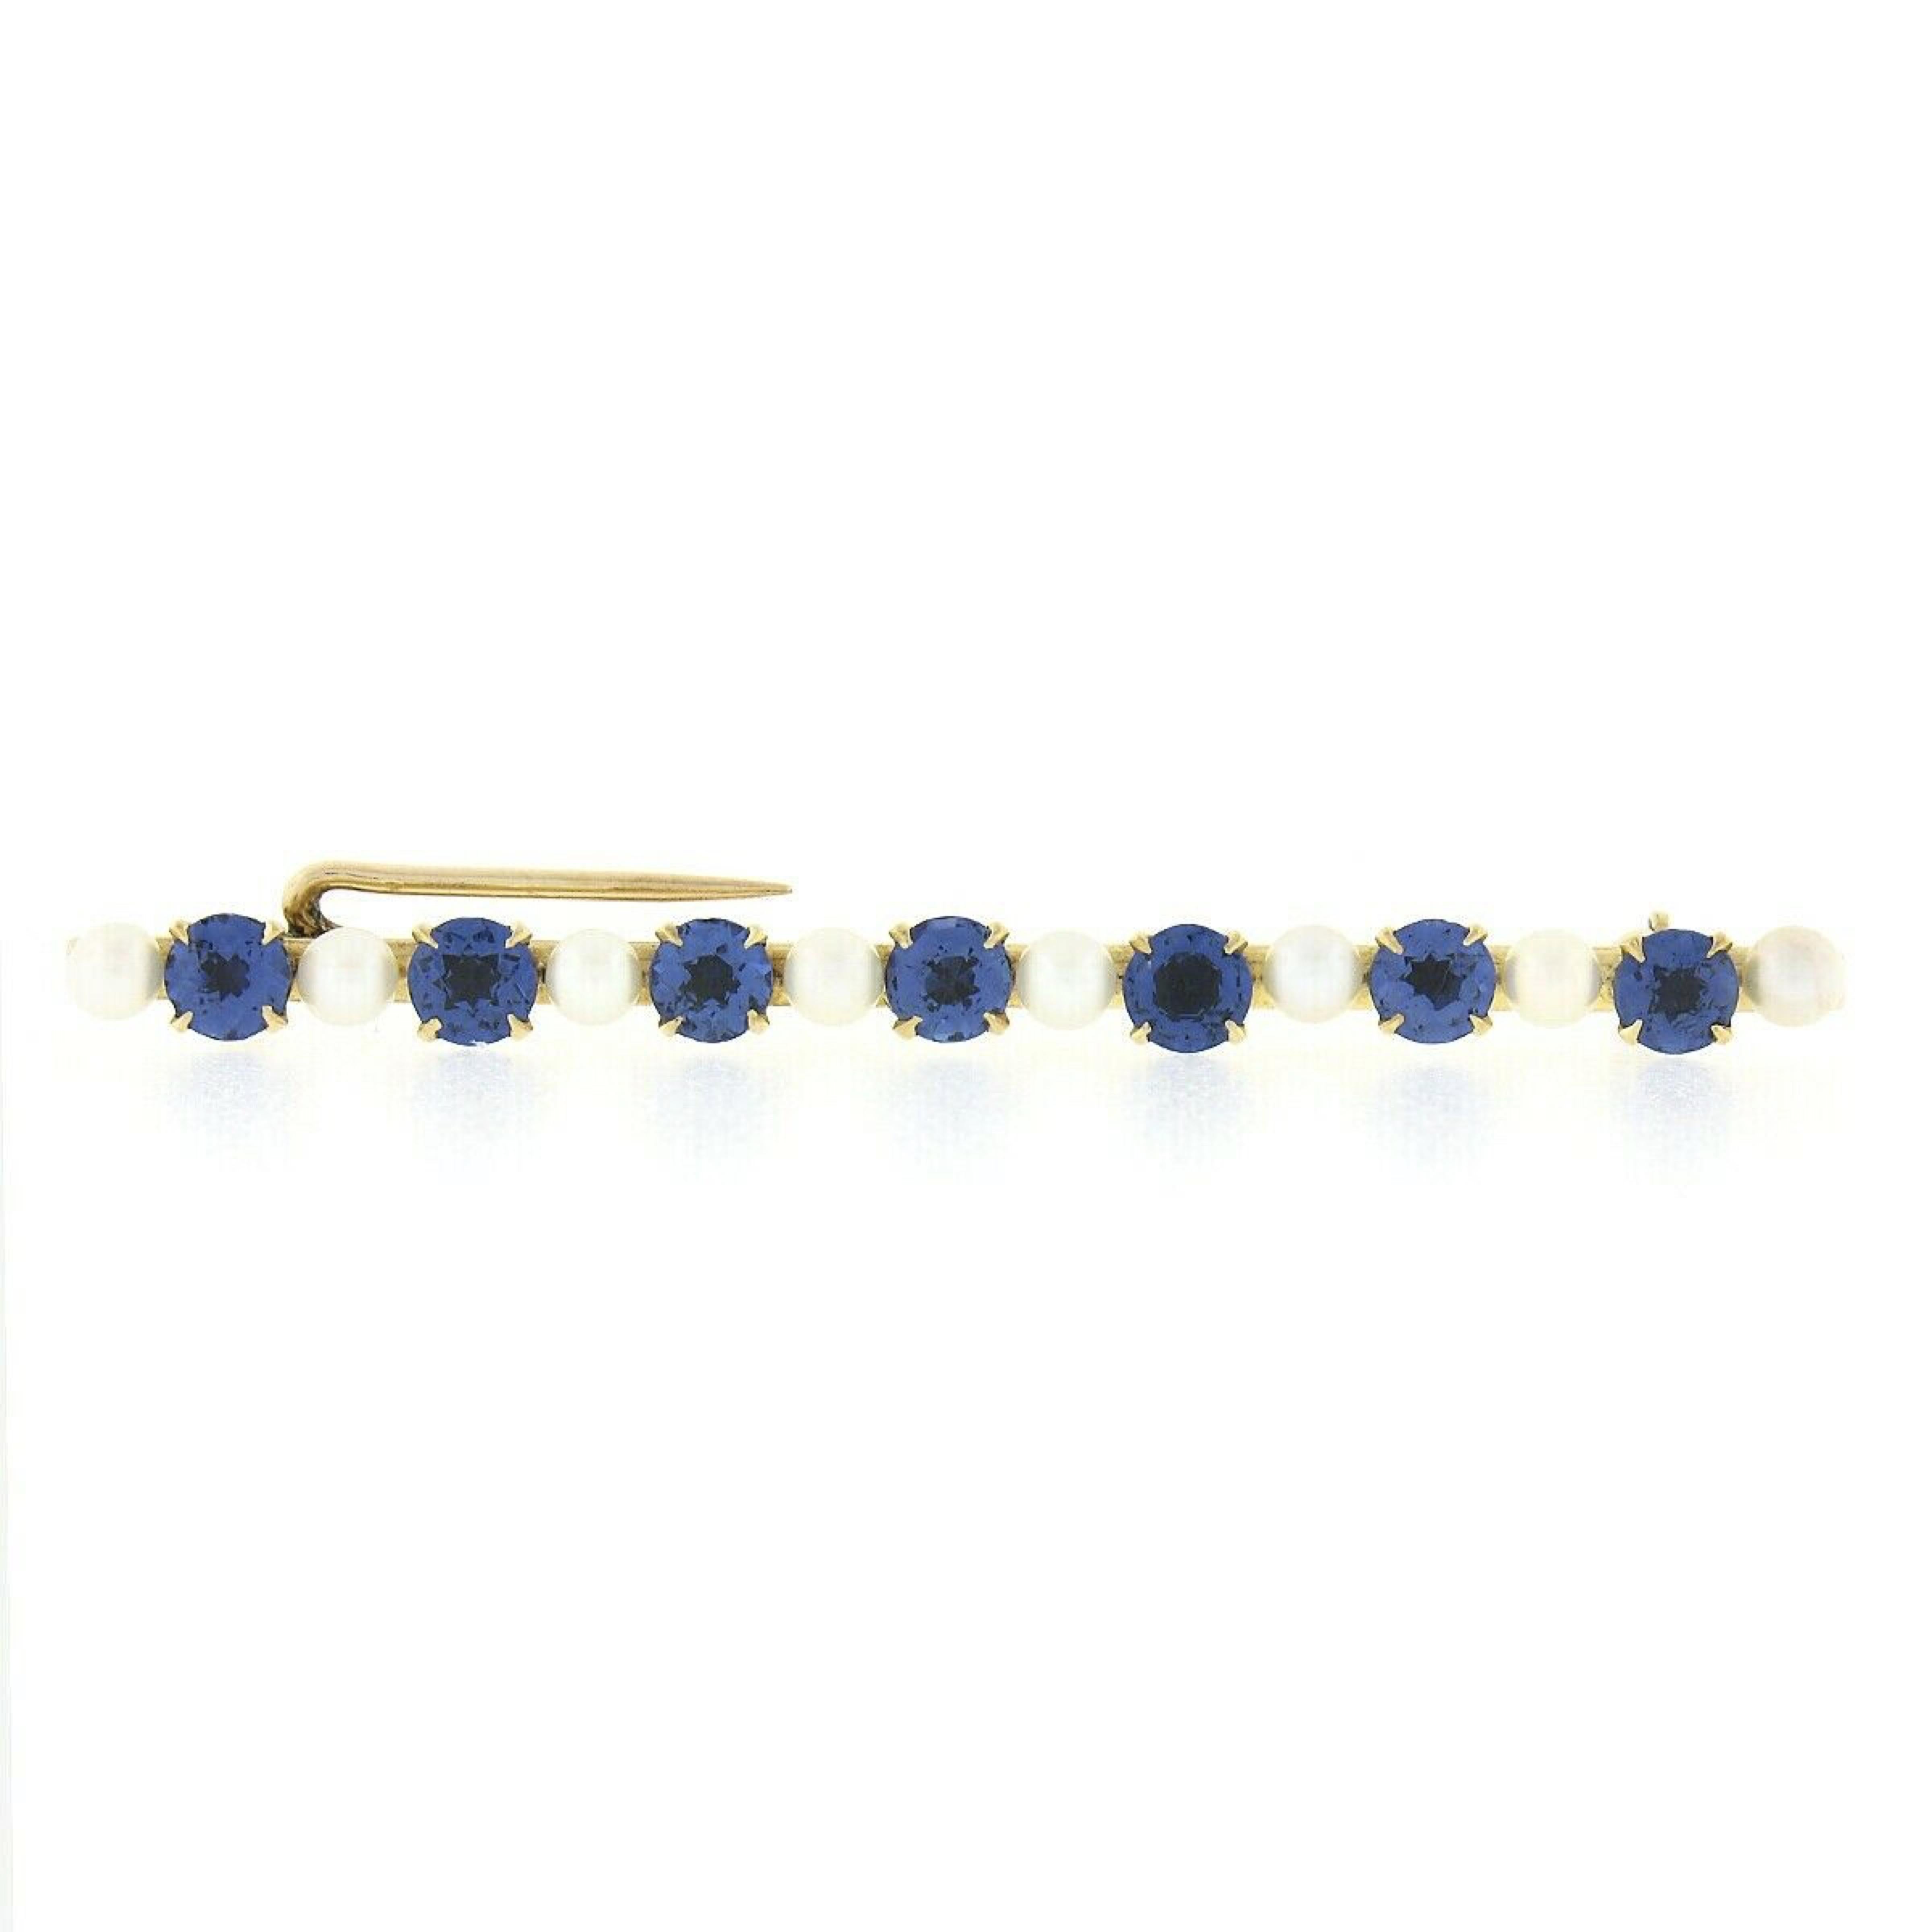 This magnificent antique bar pin brooch was crafted from solid 14k yellow gold during the art nouveau period and features 7, 100% natural, old round cut Montana sapphires of which two were randomly selected for certification by GIA. The sapphires